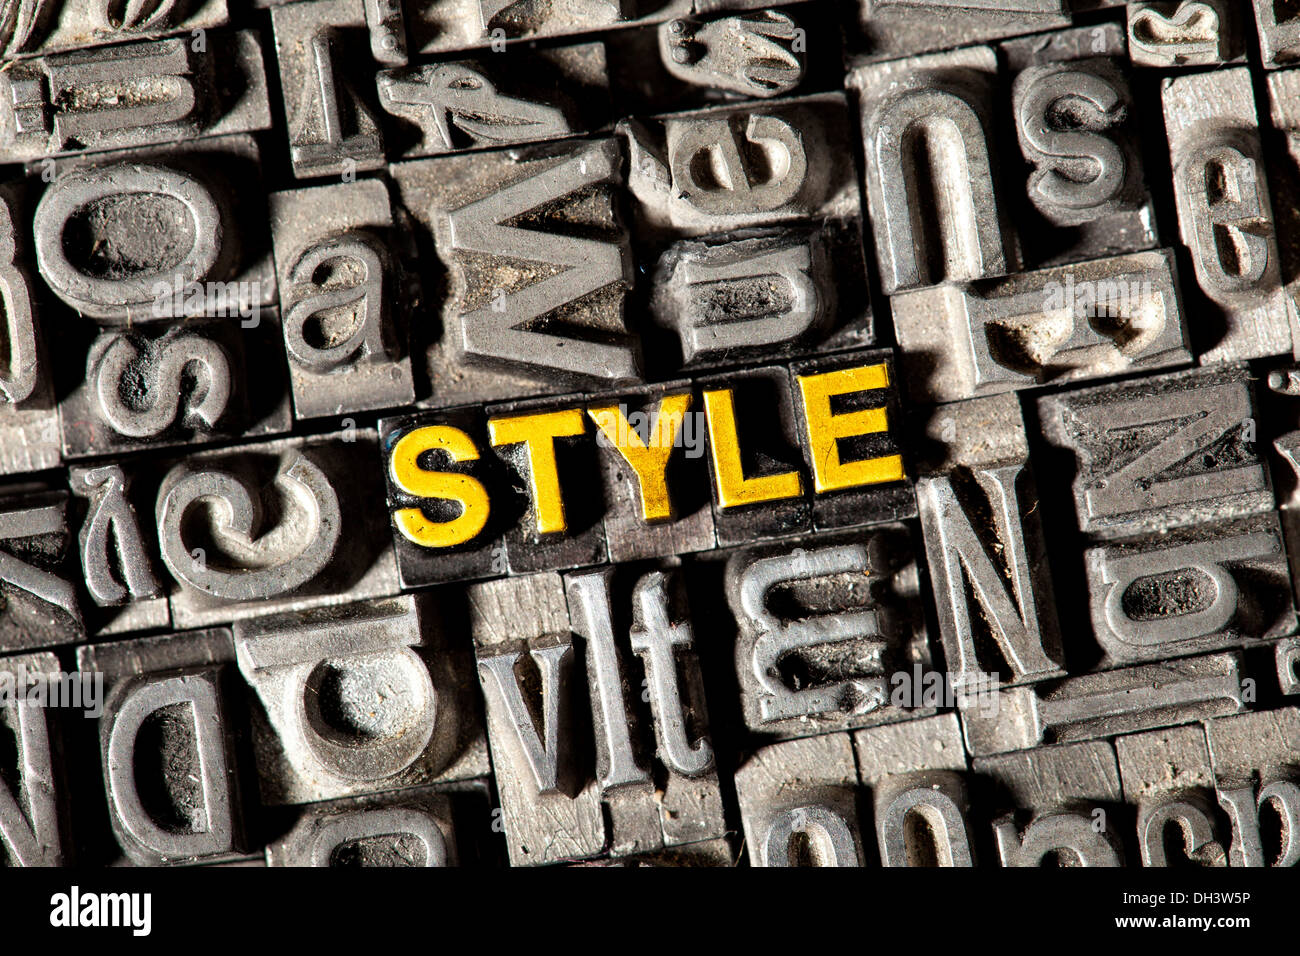 Old lead letters forming the word "STYLE" Stock Photo